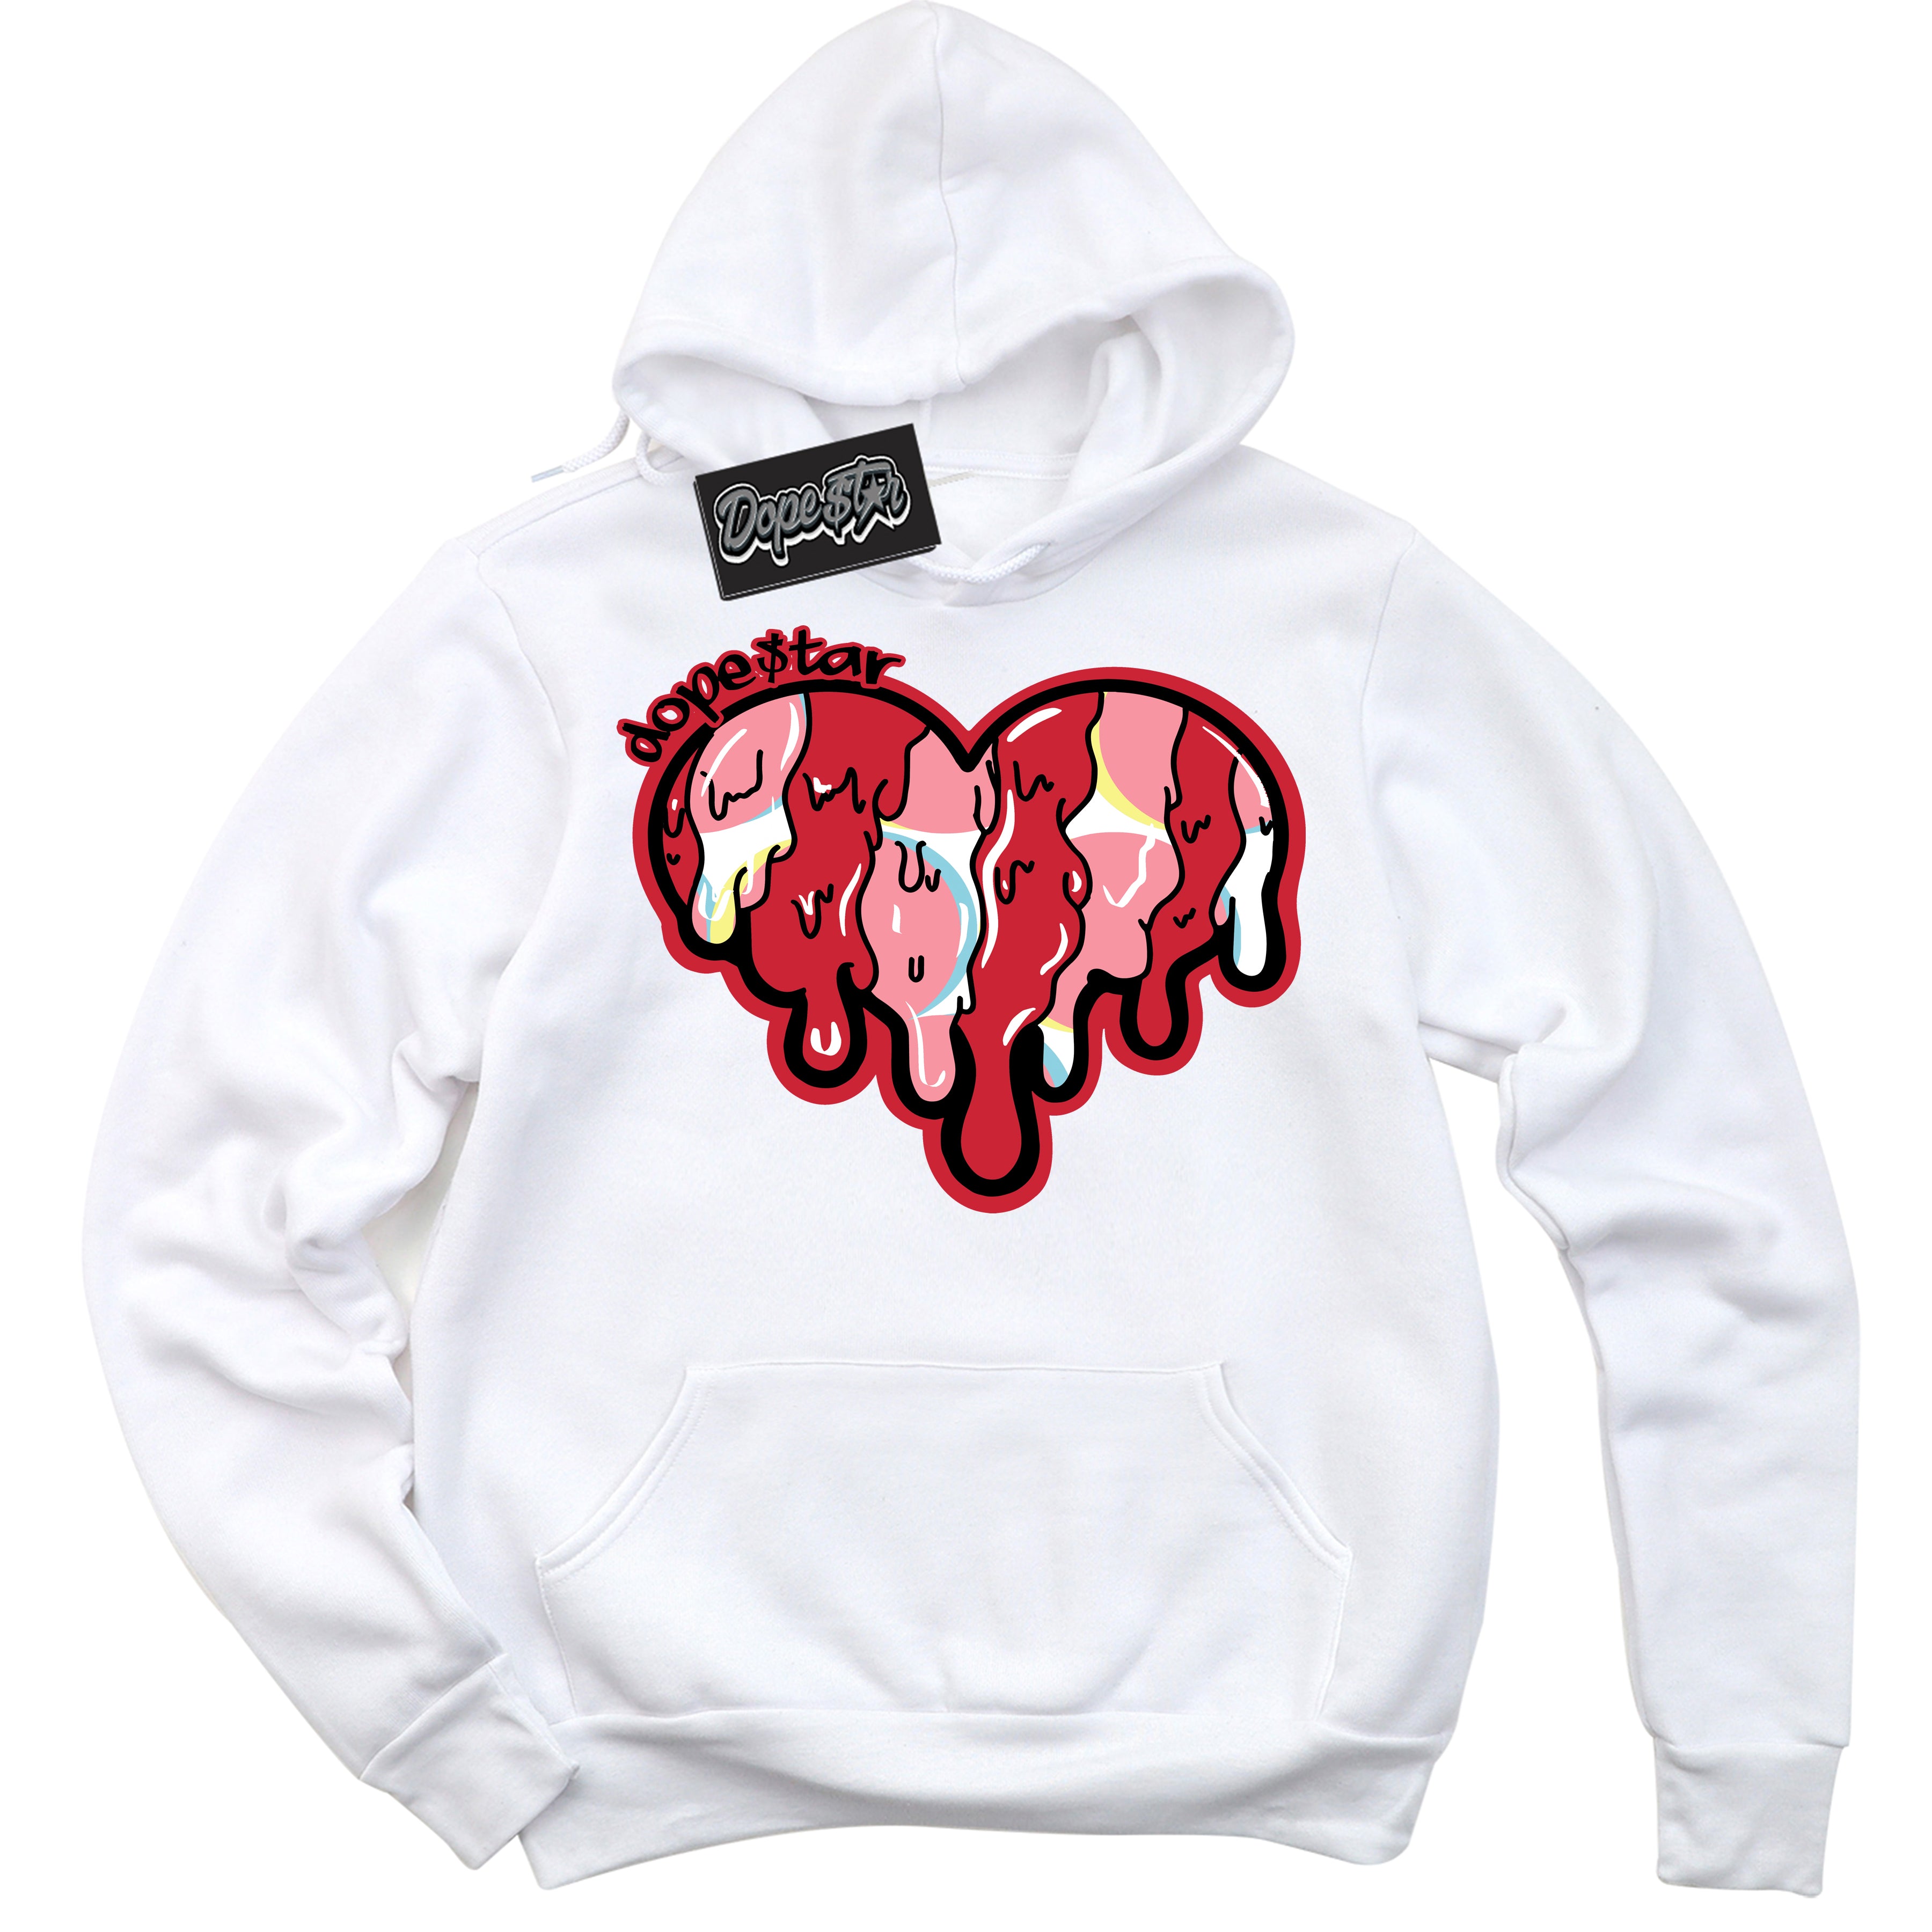 Cool White Graphic DopeStar Hoodie with “ Melting Heart “ print, that perfectly matches Spider-Verse 1s sneakers